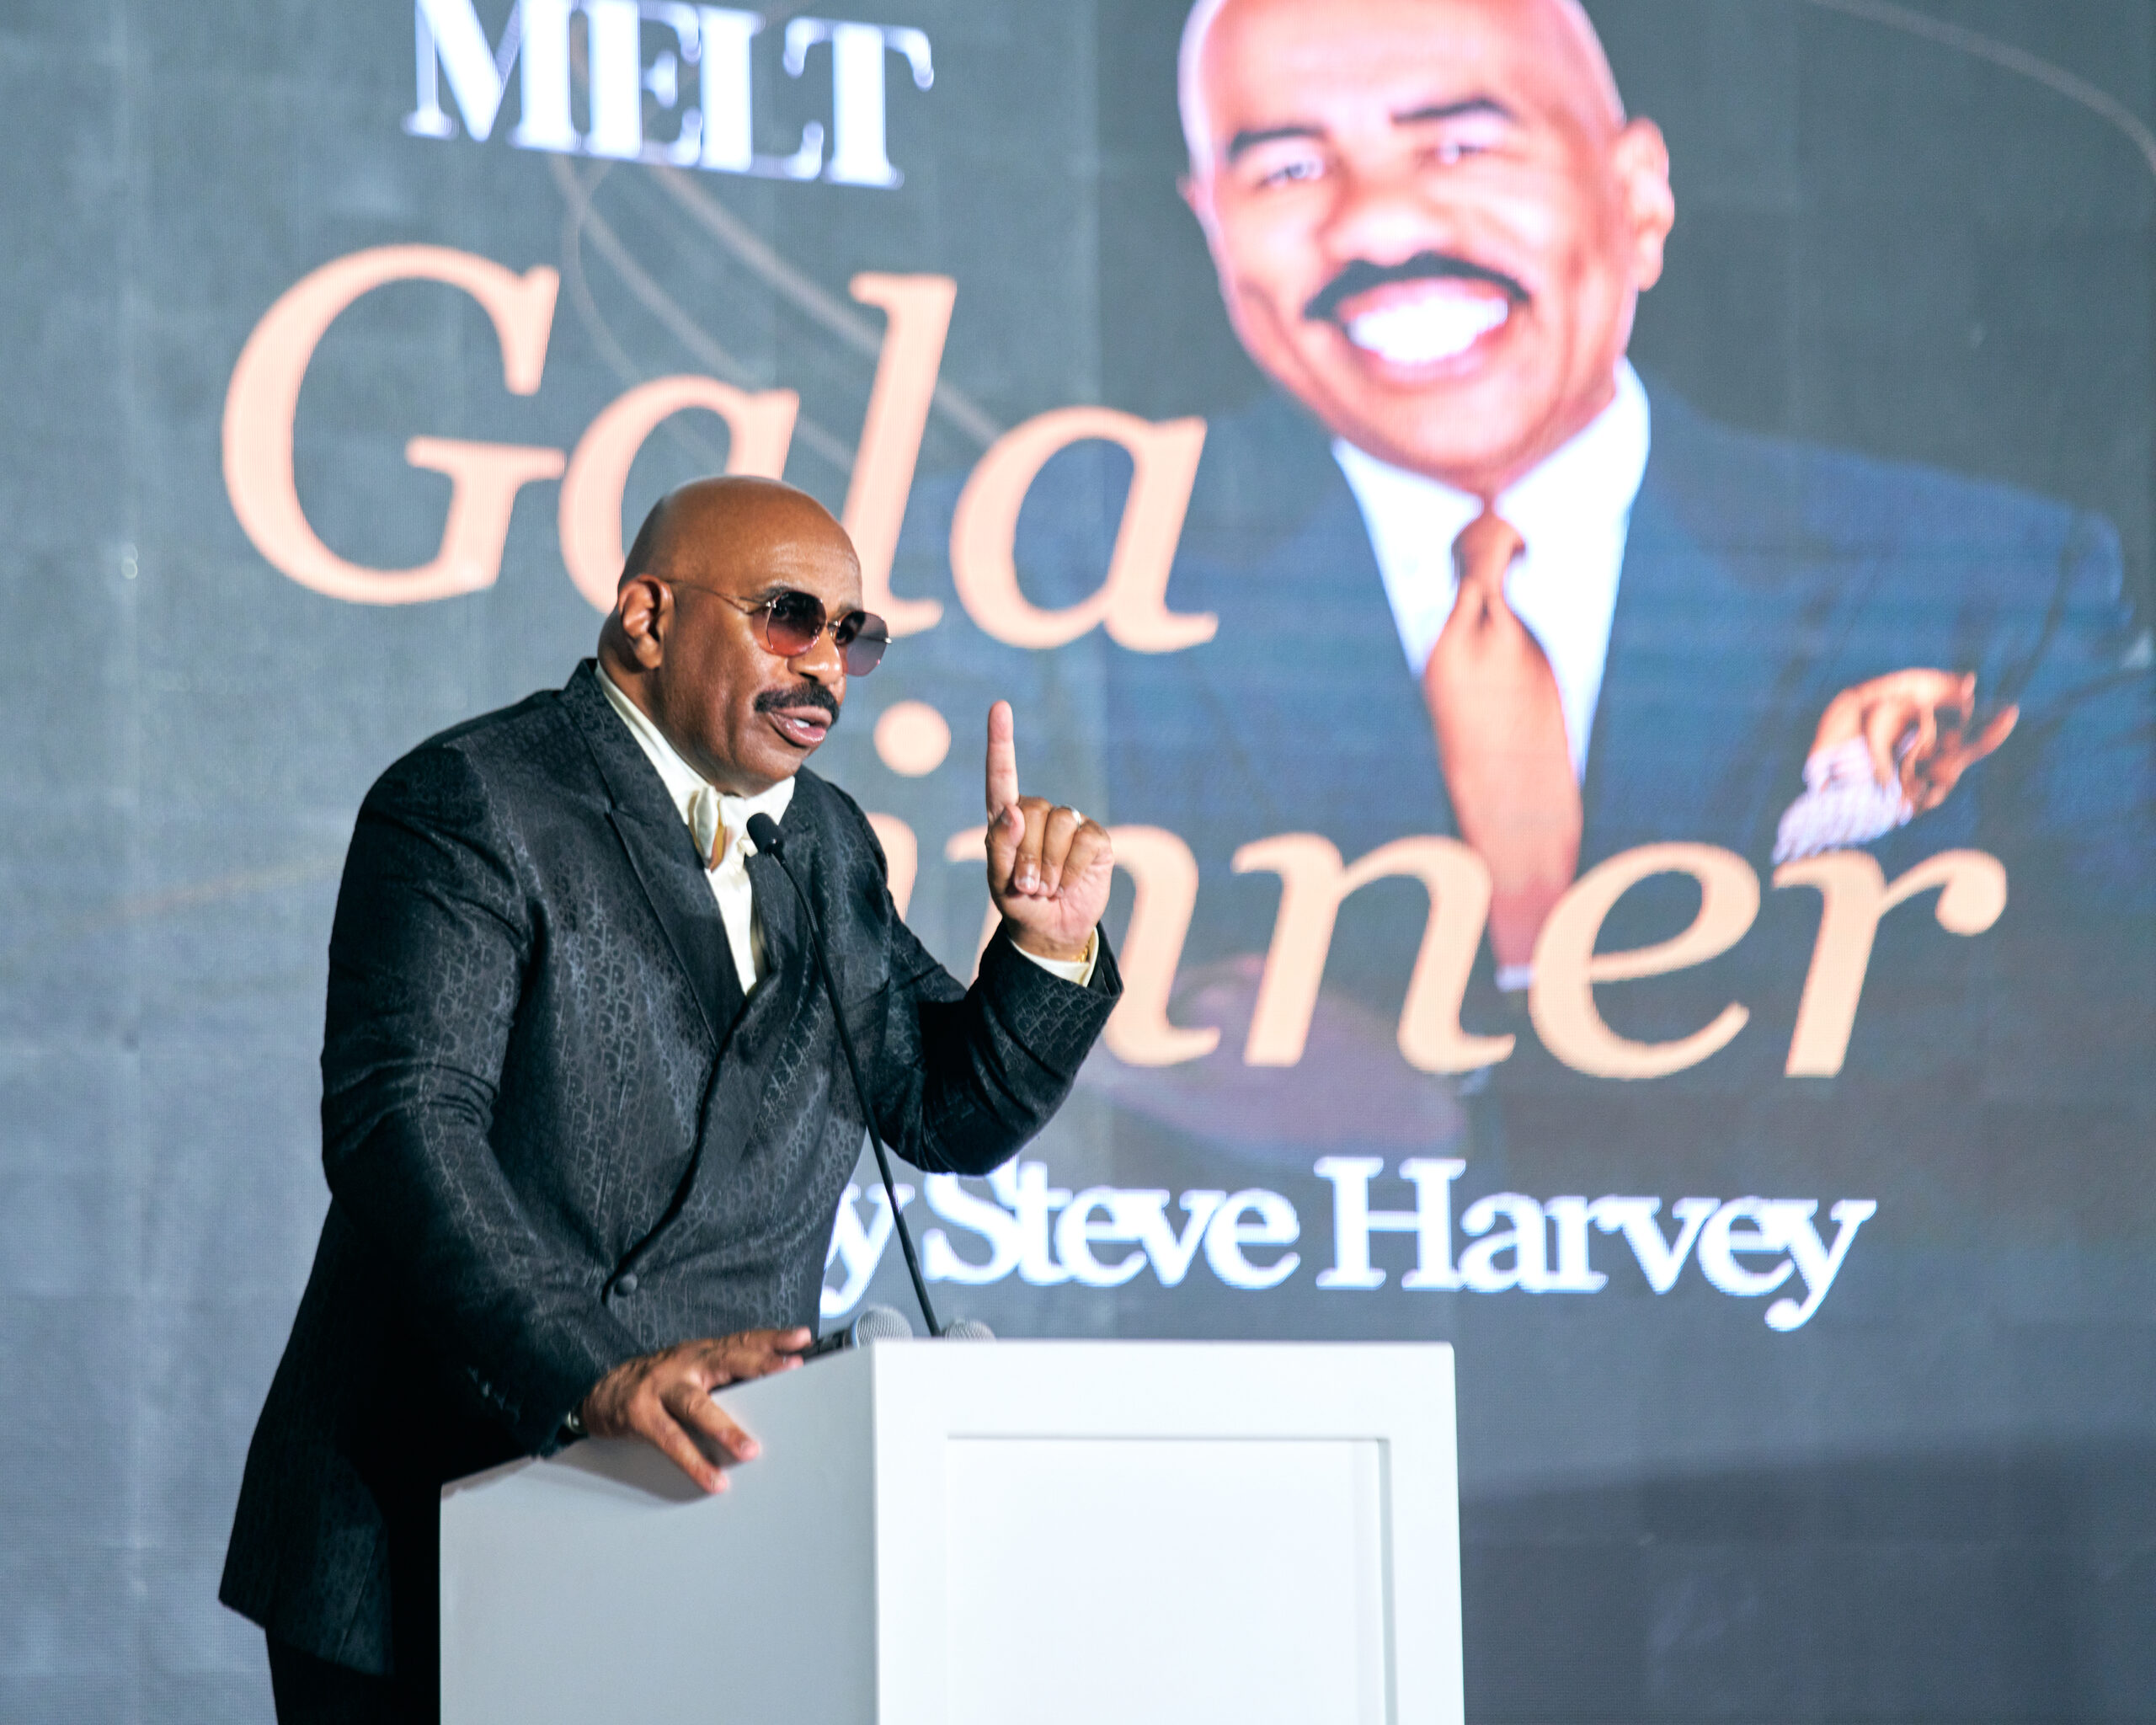 Steve Harvey smiles for the camera at the Melt Golf Classic